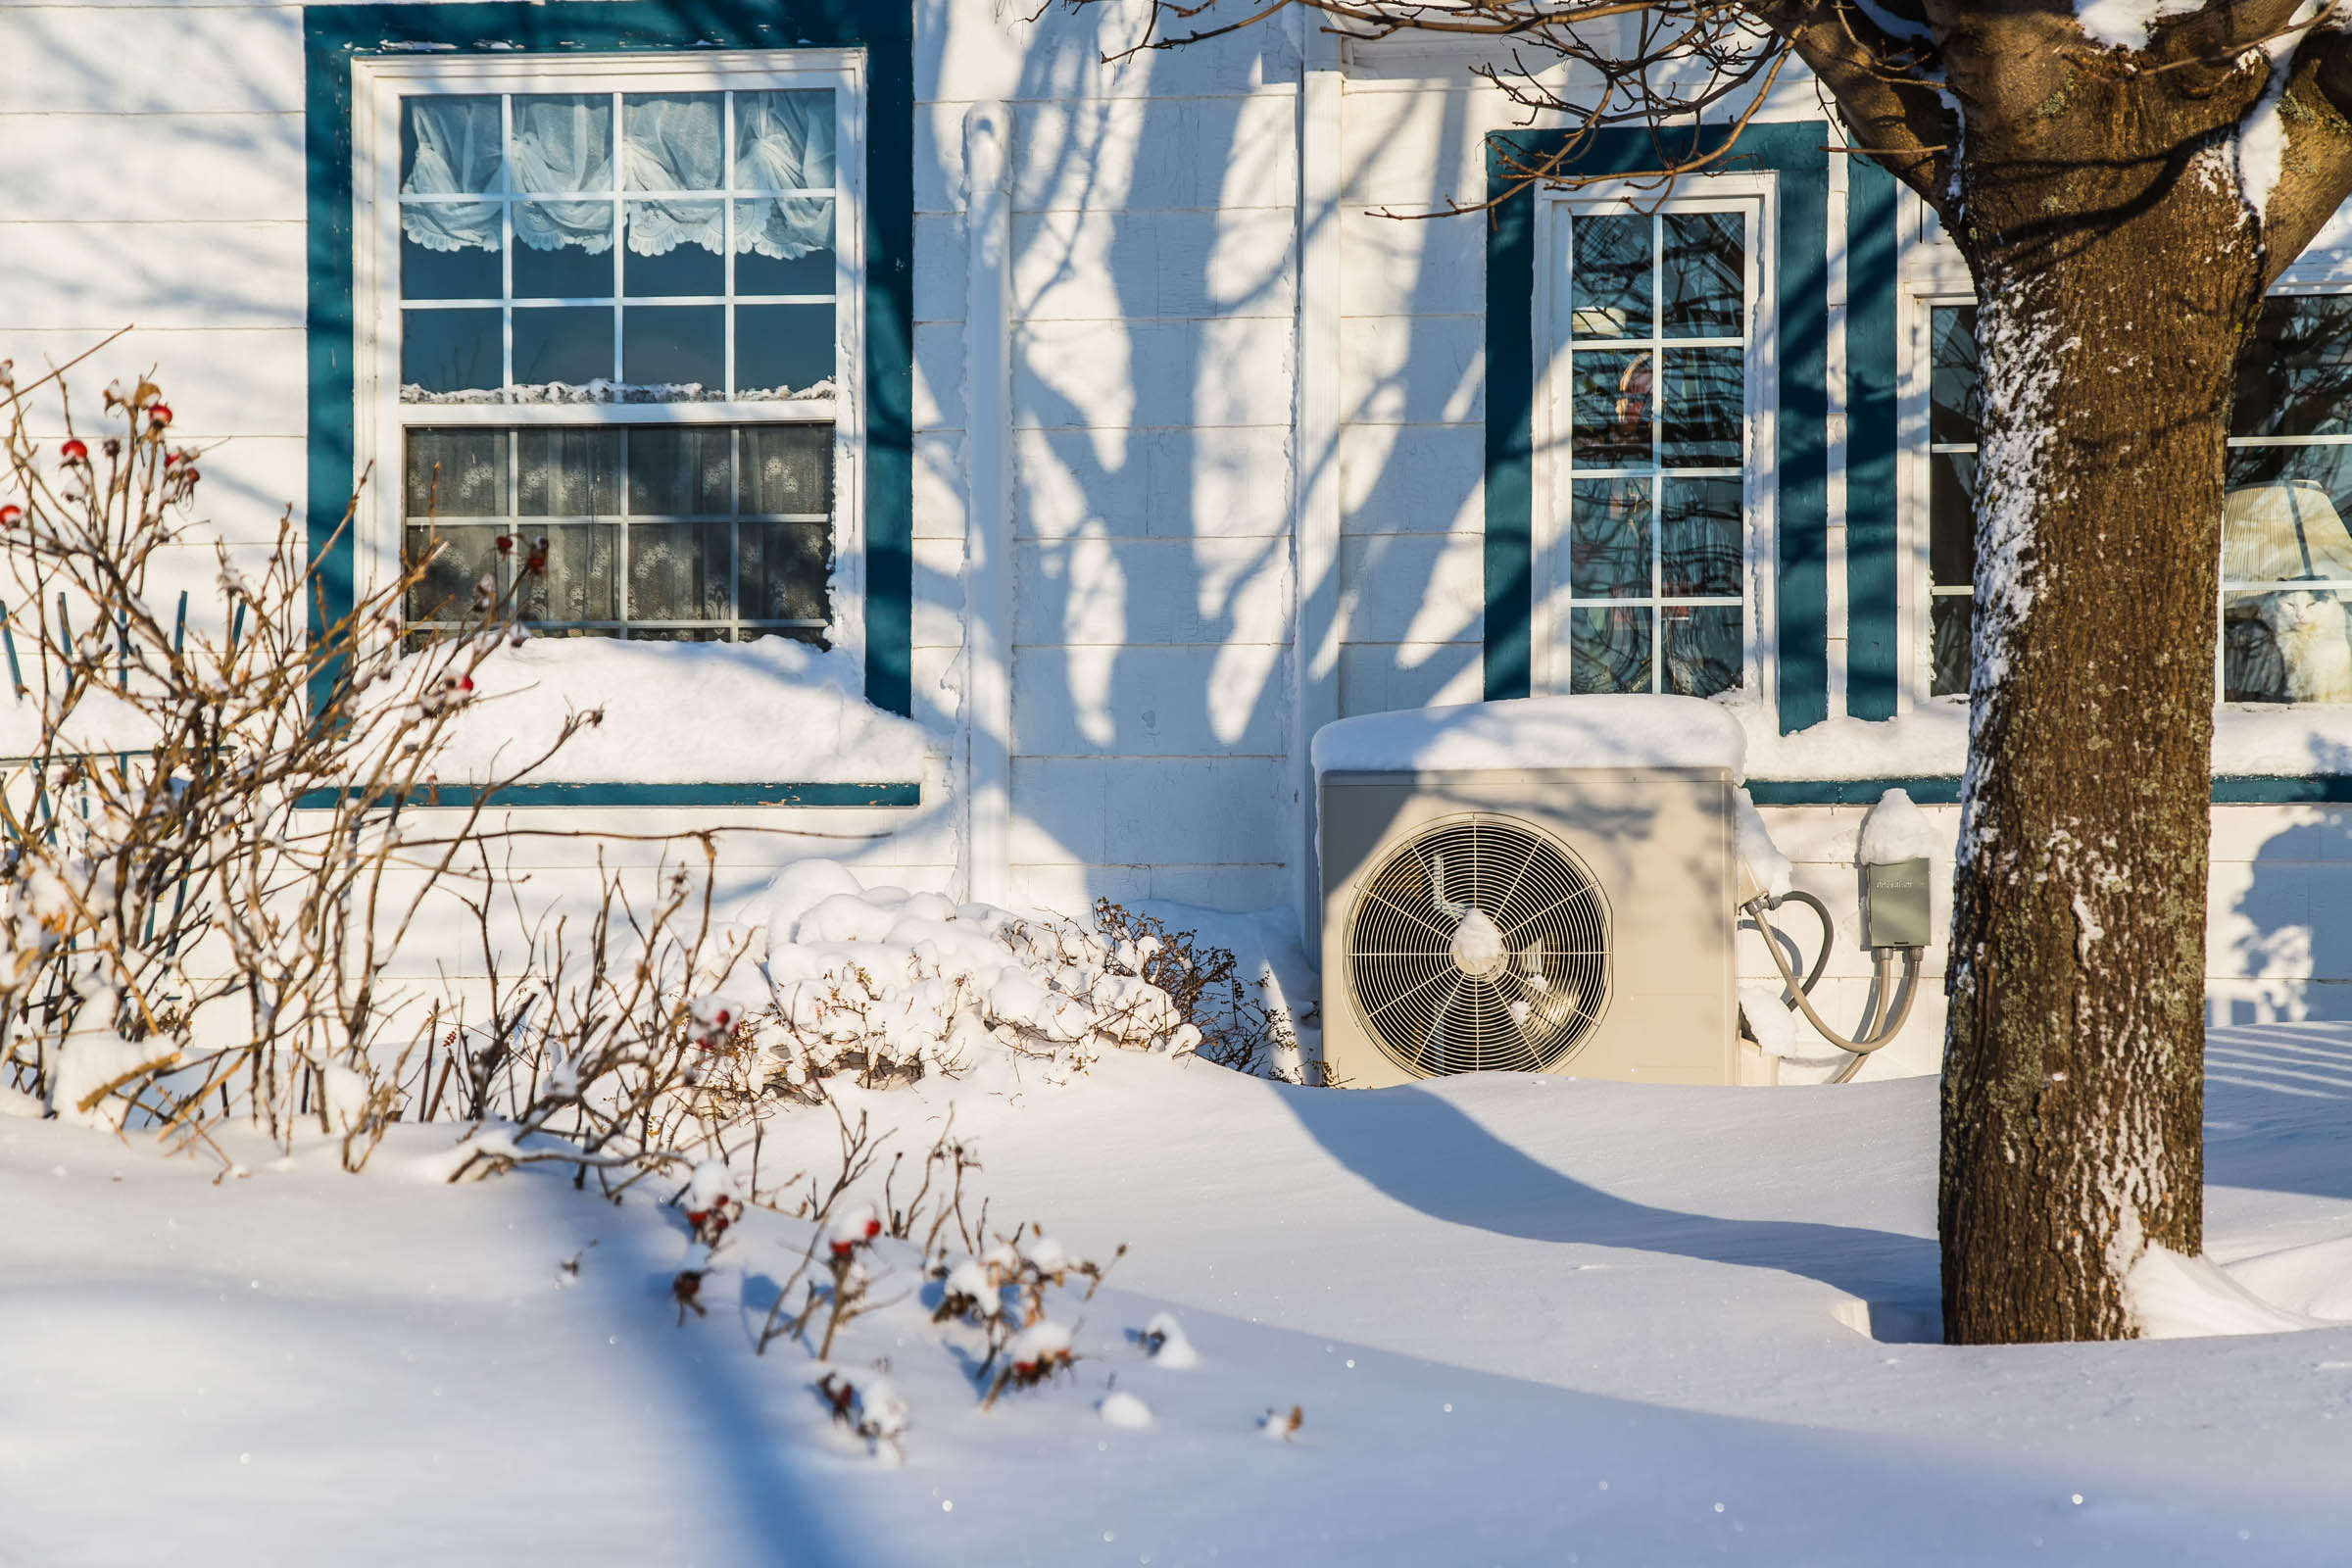 A heat pump unit outside a white house with teal window trim, surrounded by snow and bare shrubs, with shadows of tree branches on the facade.